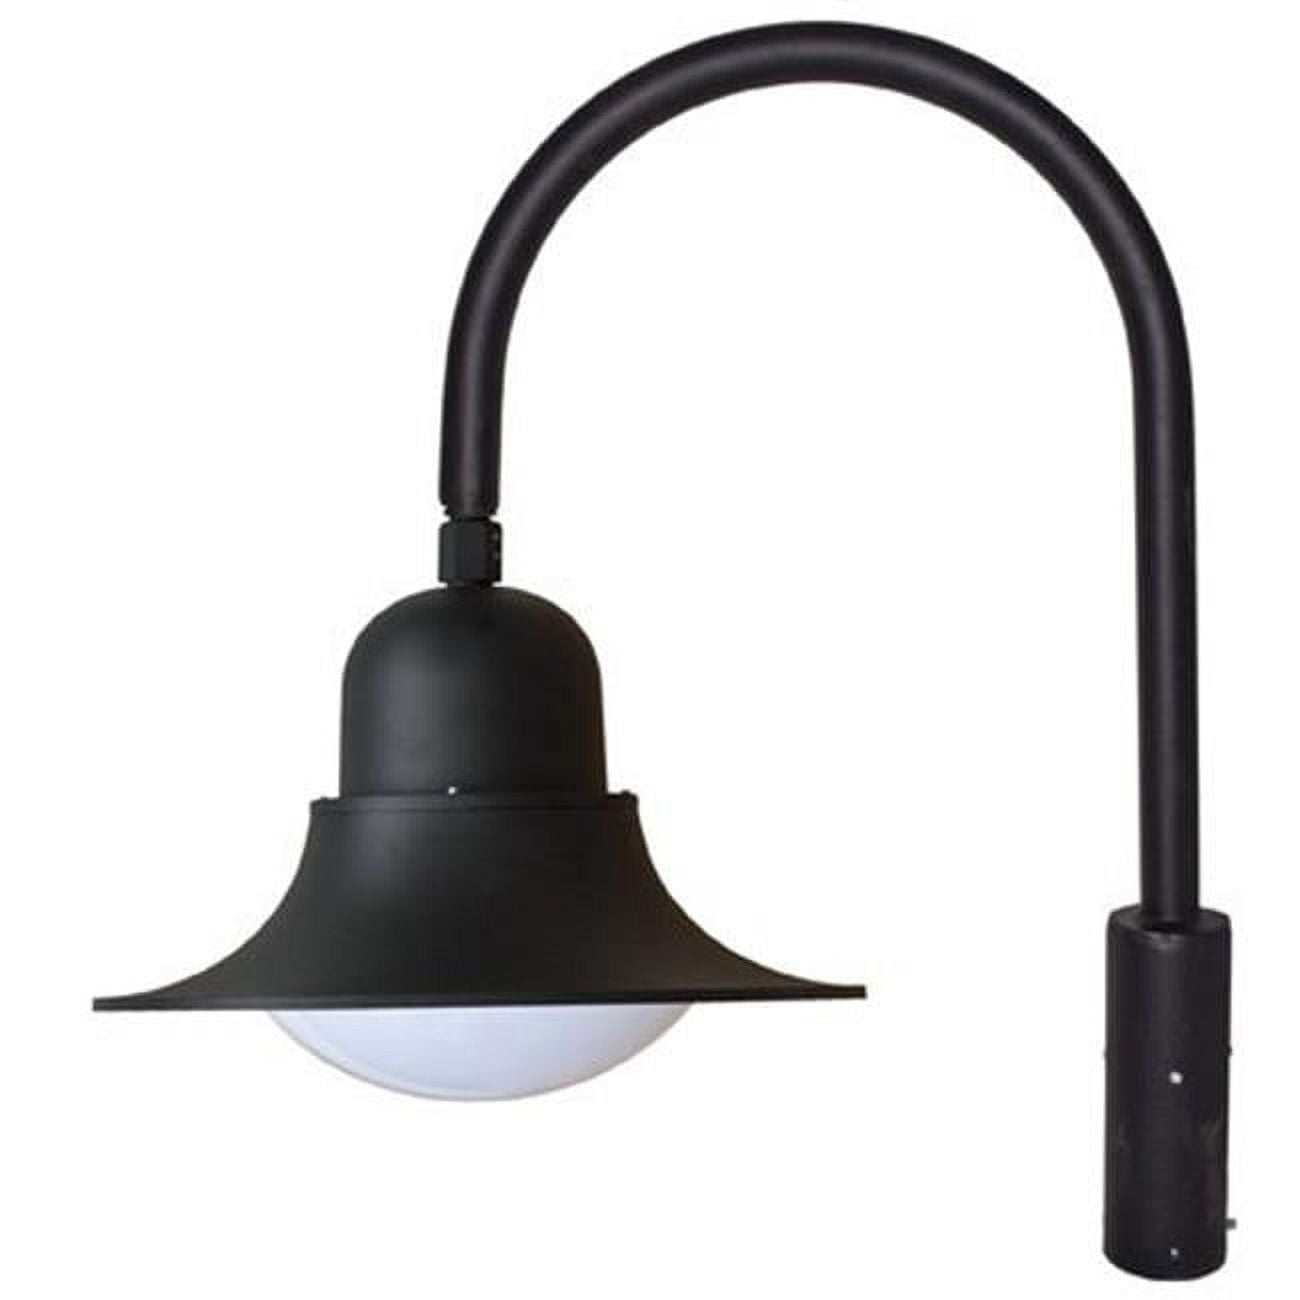 Picture of Dabmar Lighting GM612-B 35W 120V Powder Coated Cast Aluminum Post Top Light Fixture with High Pressure Sodium Lamp, Black - 35.50 x 22 x 30.92 in.